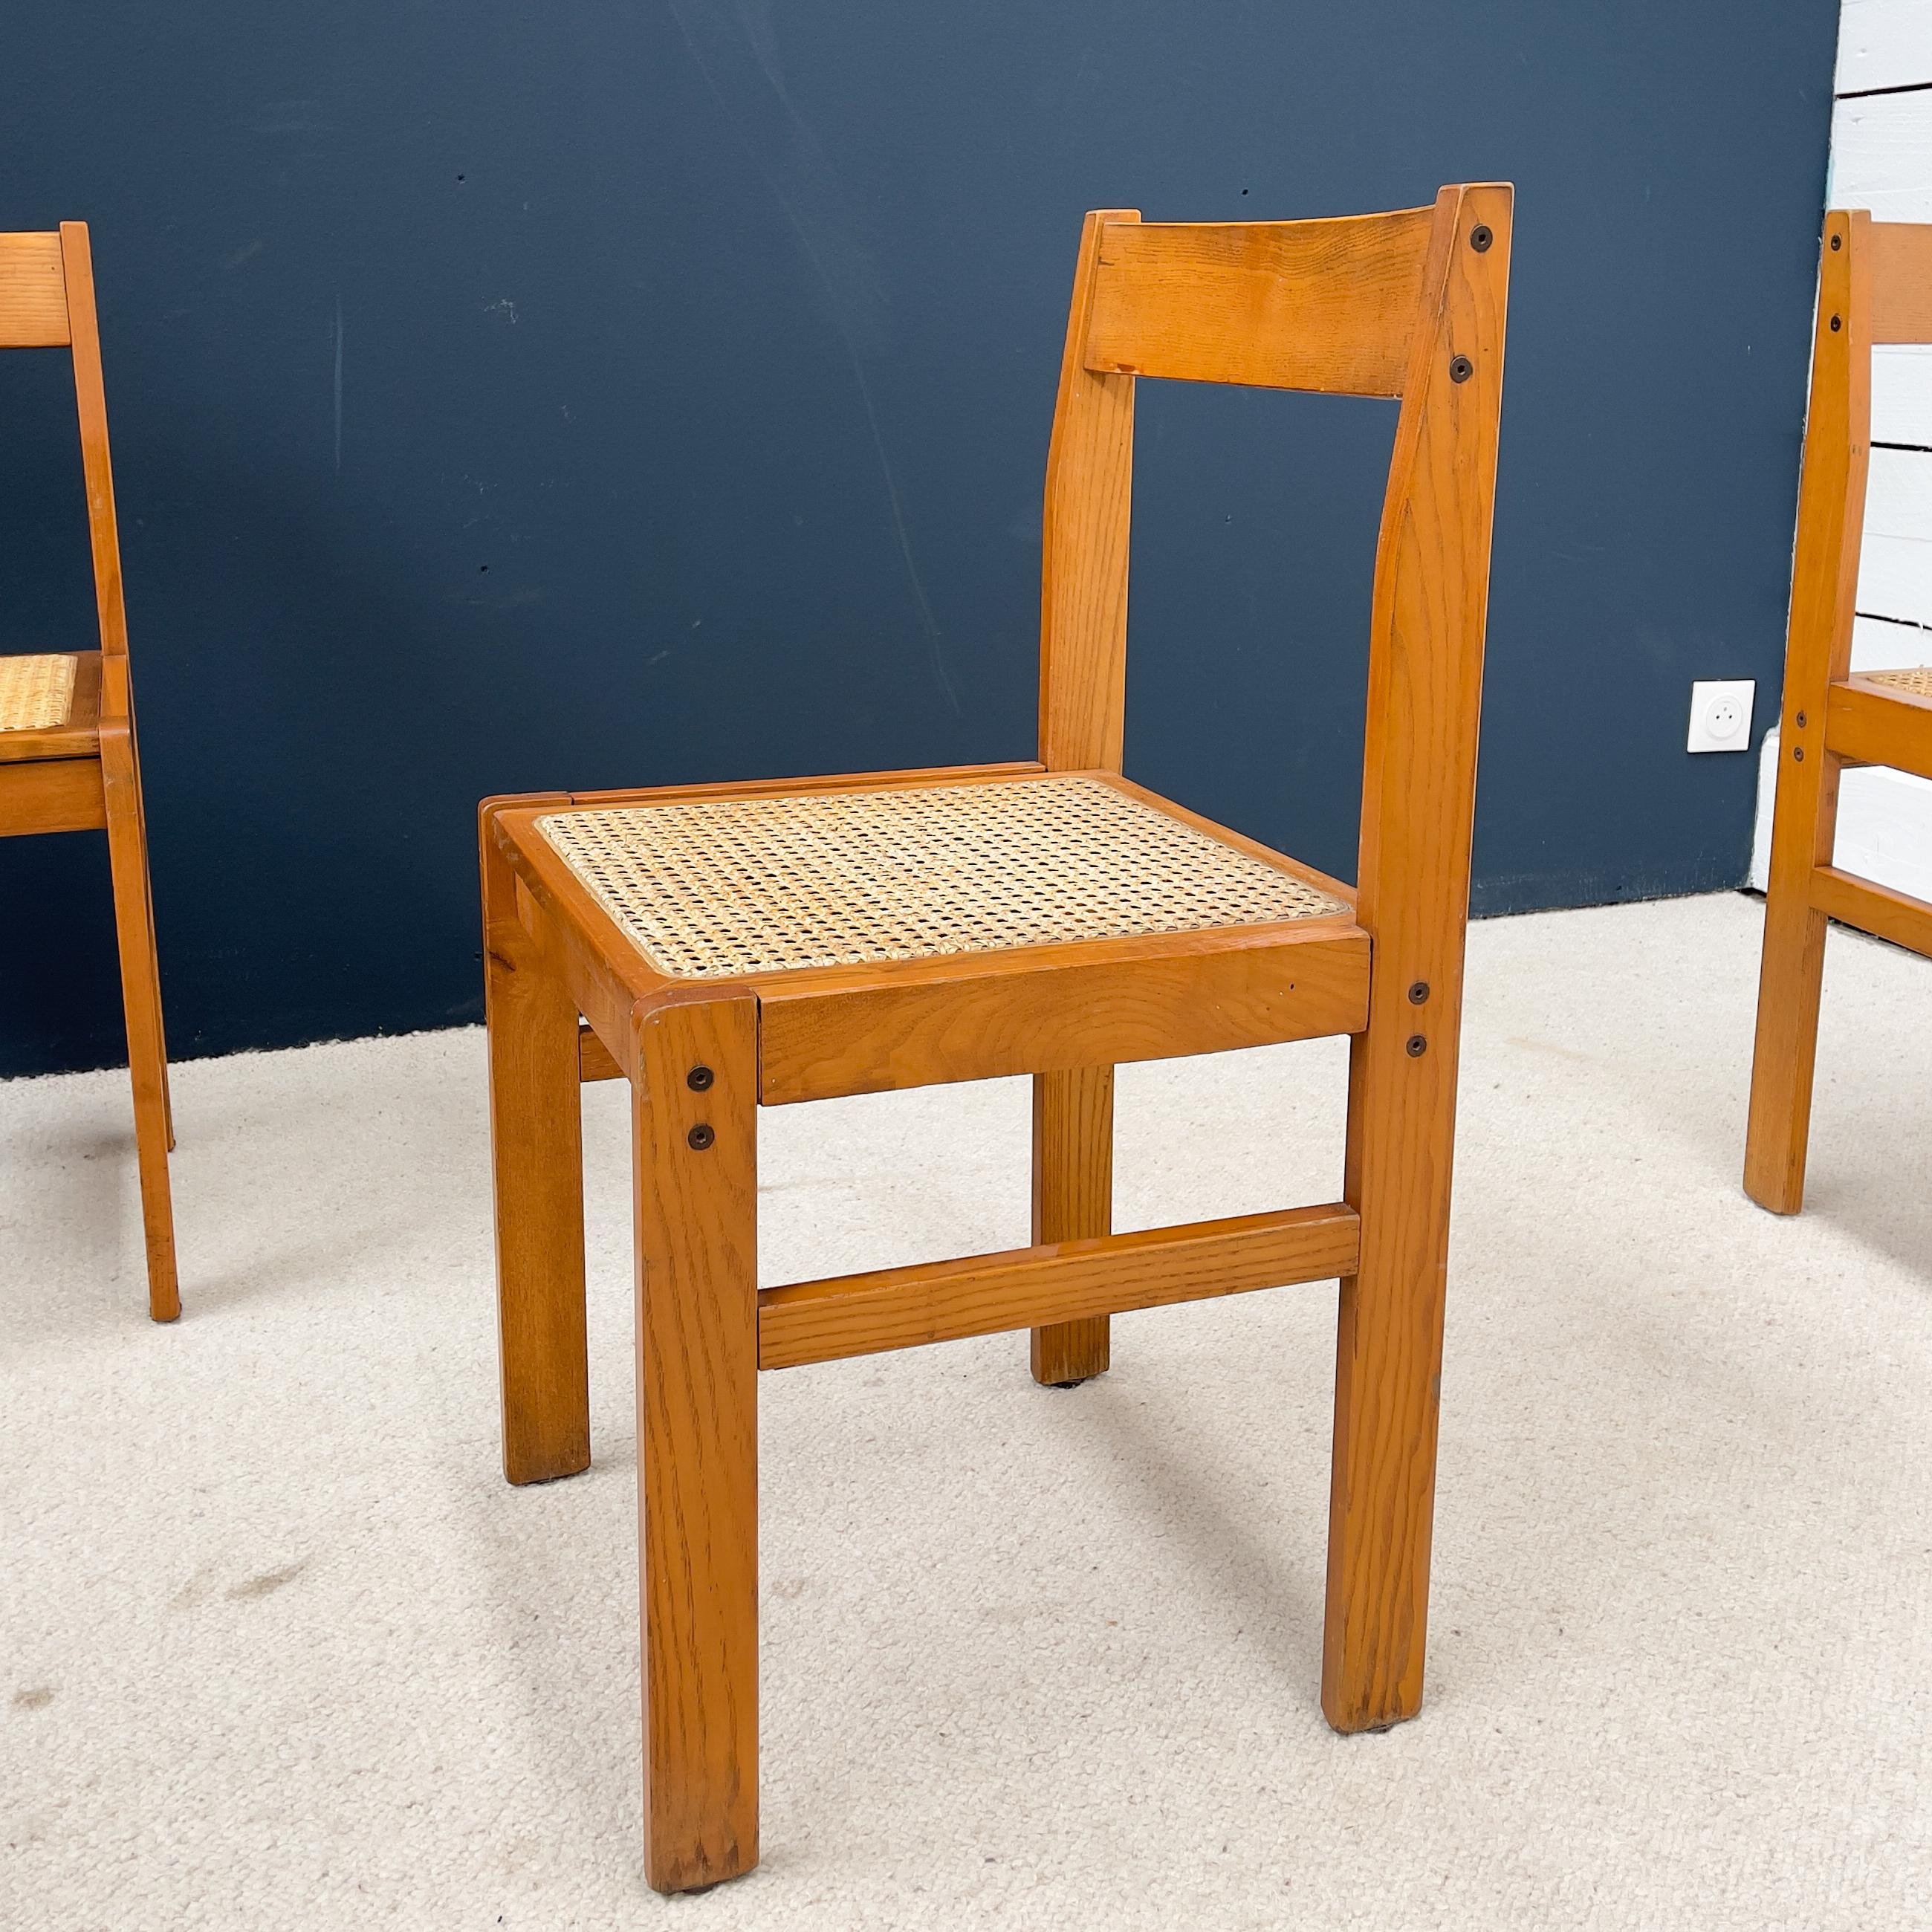 Set of 4 vintage chairs in ash and caning 1950
Structure of the chair in ash and seat in cane.
Seat height: 45 cm.